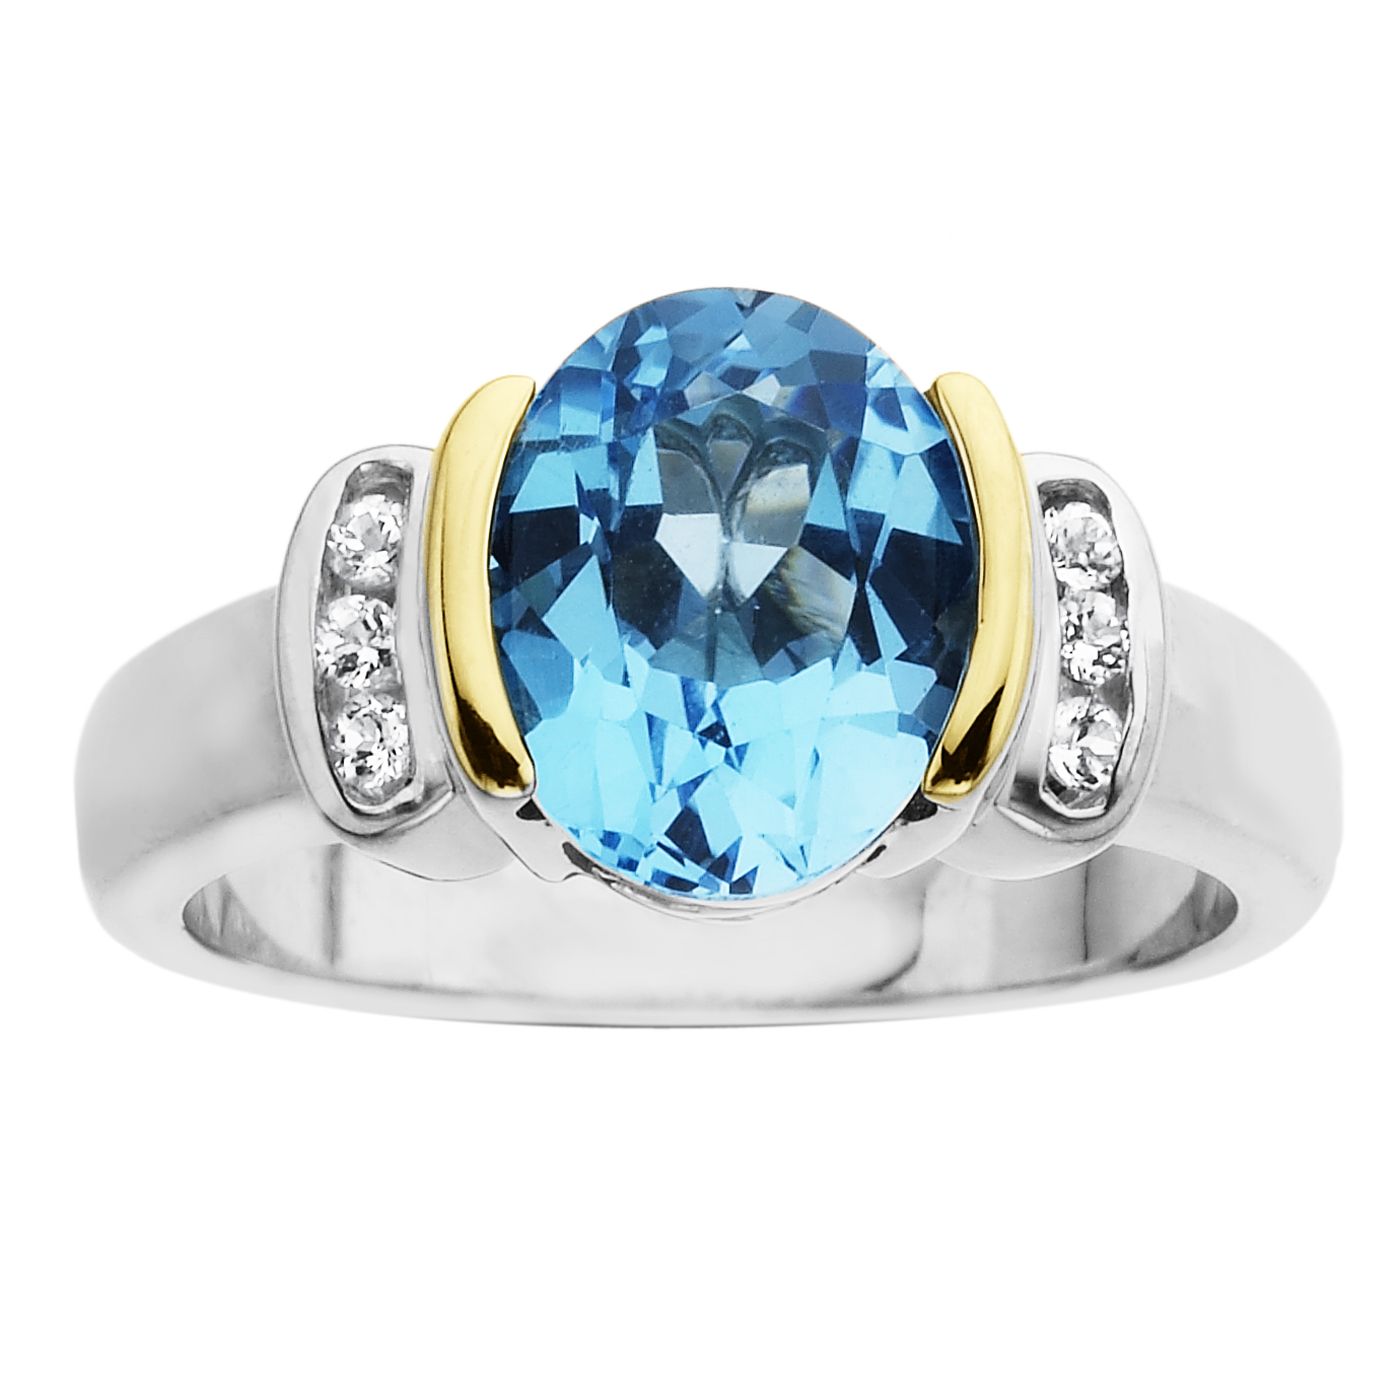 Blue and White Topaz Ring. 14K Yellow Gold and Sterling Silver